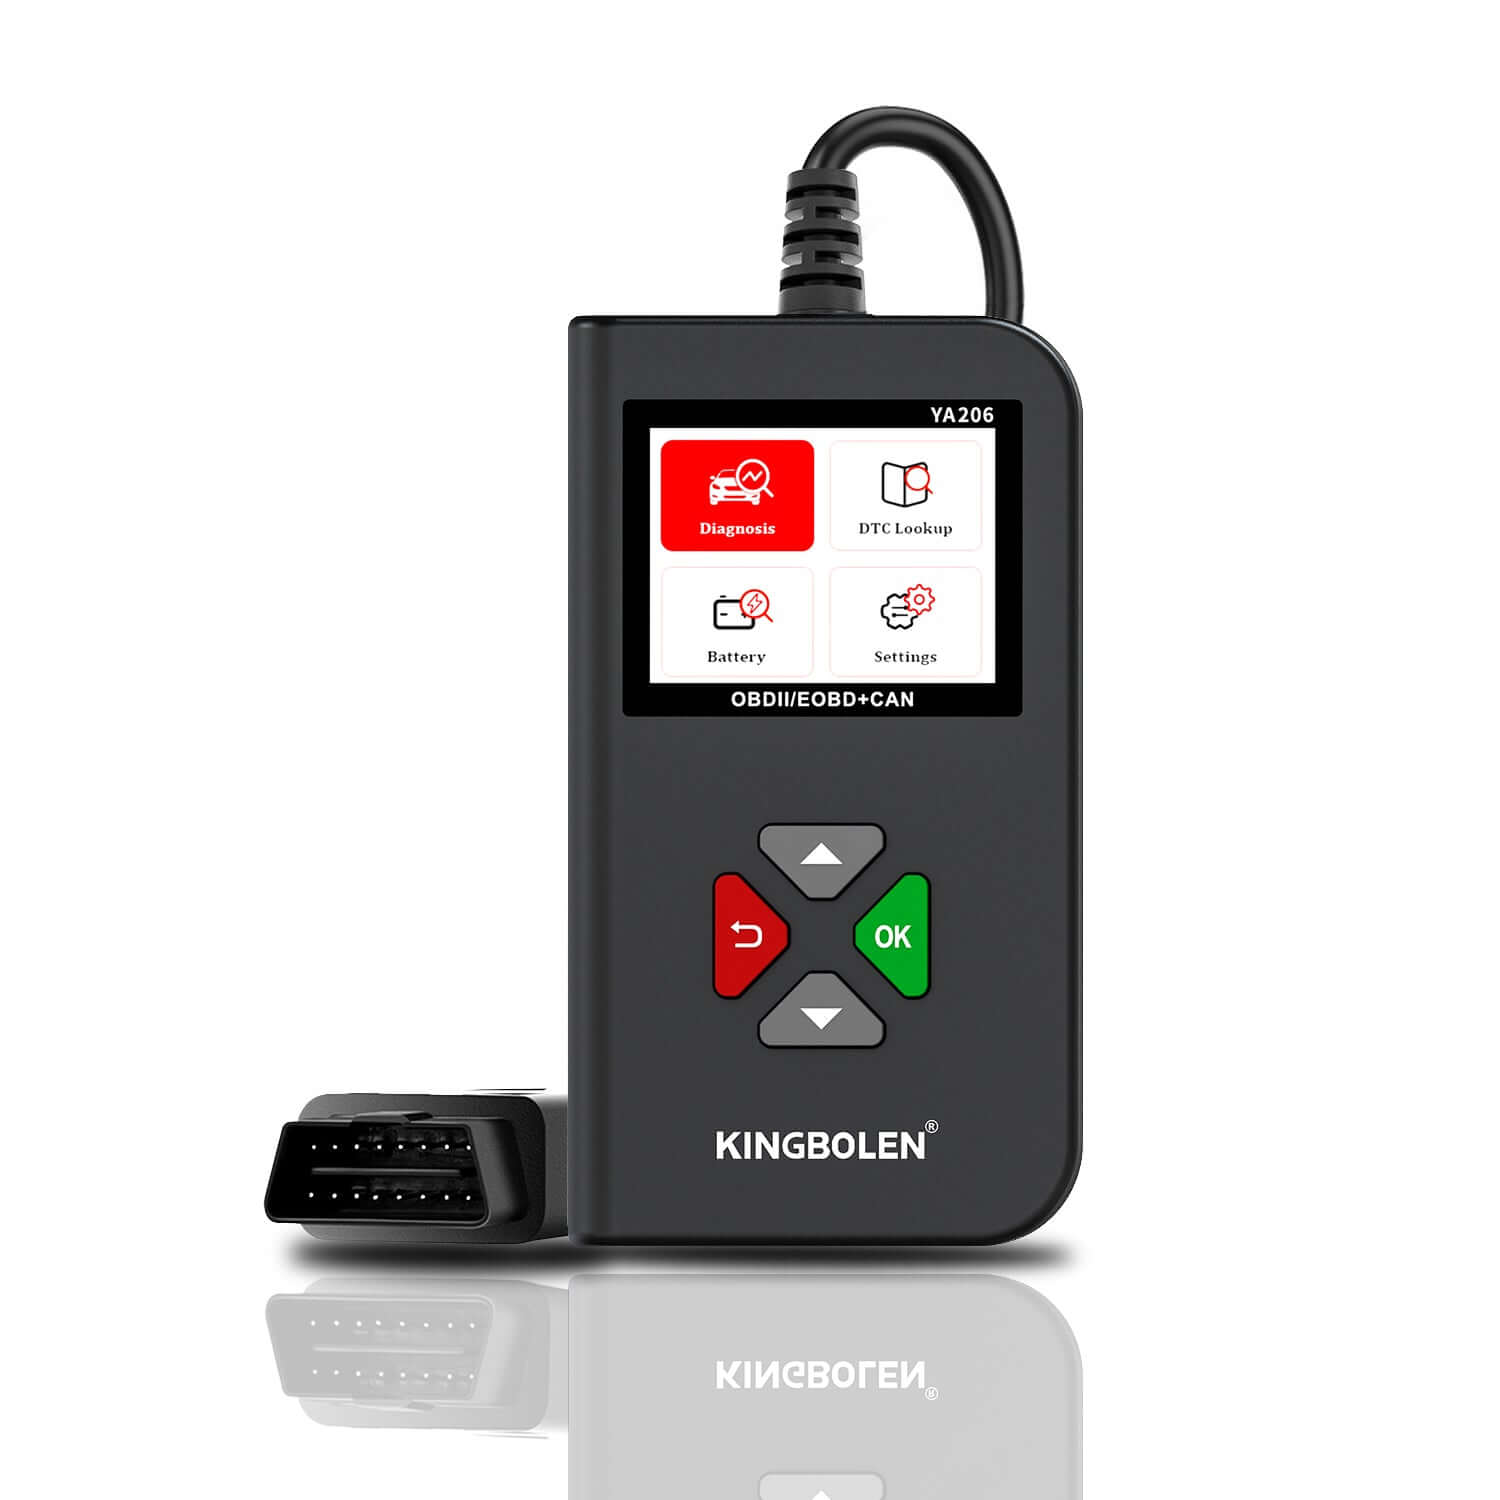 KINGBOLEN Ediag Mini Bluetooth OBD2 Scanner Code Reader for iPhone &  Android, Full Systems Car Diagnostic Scan Tool for 1996 & Newer OBD2  Vehicles